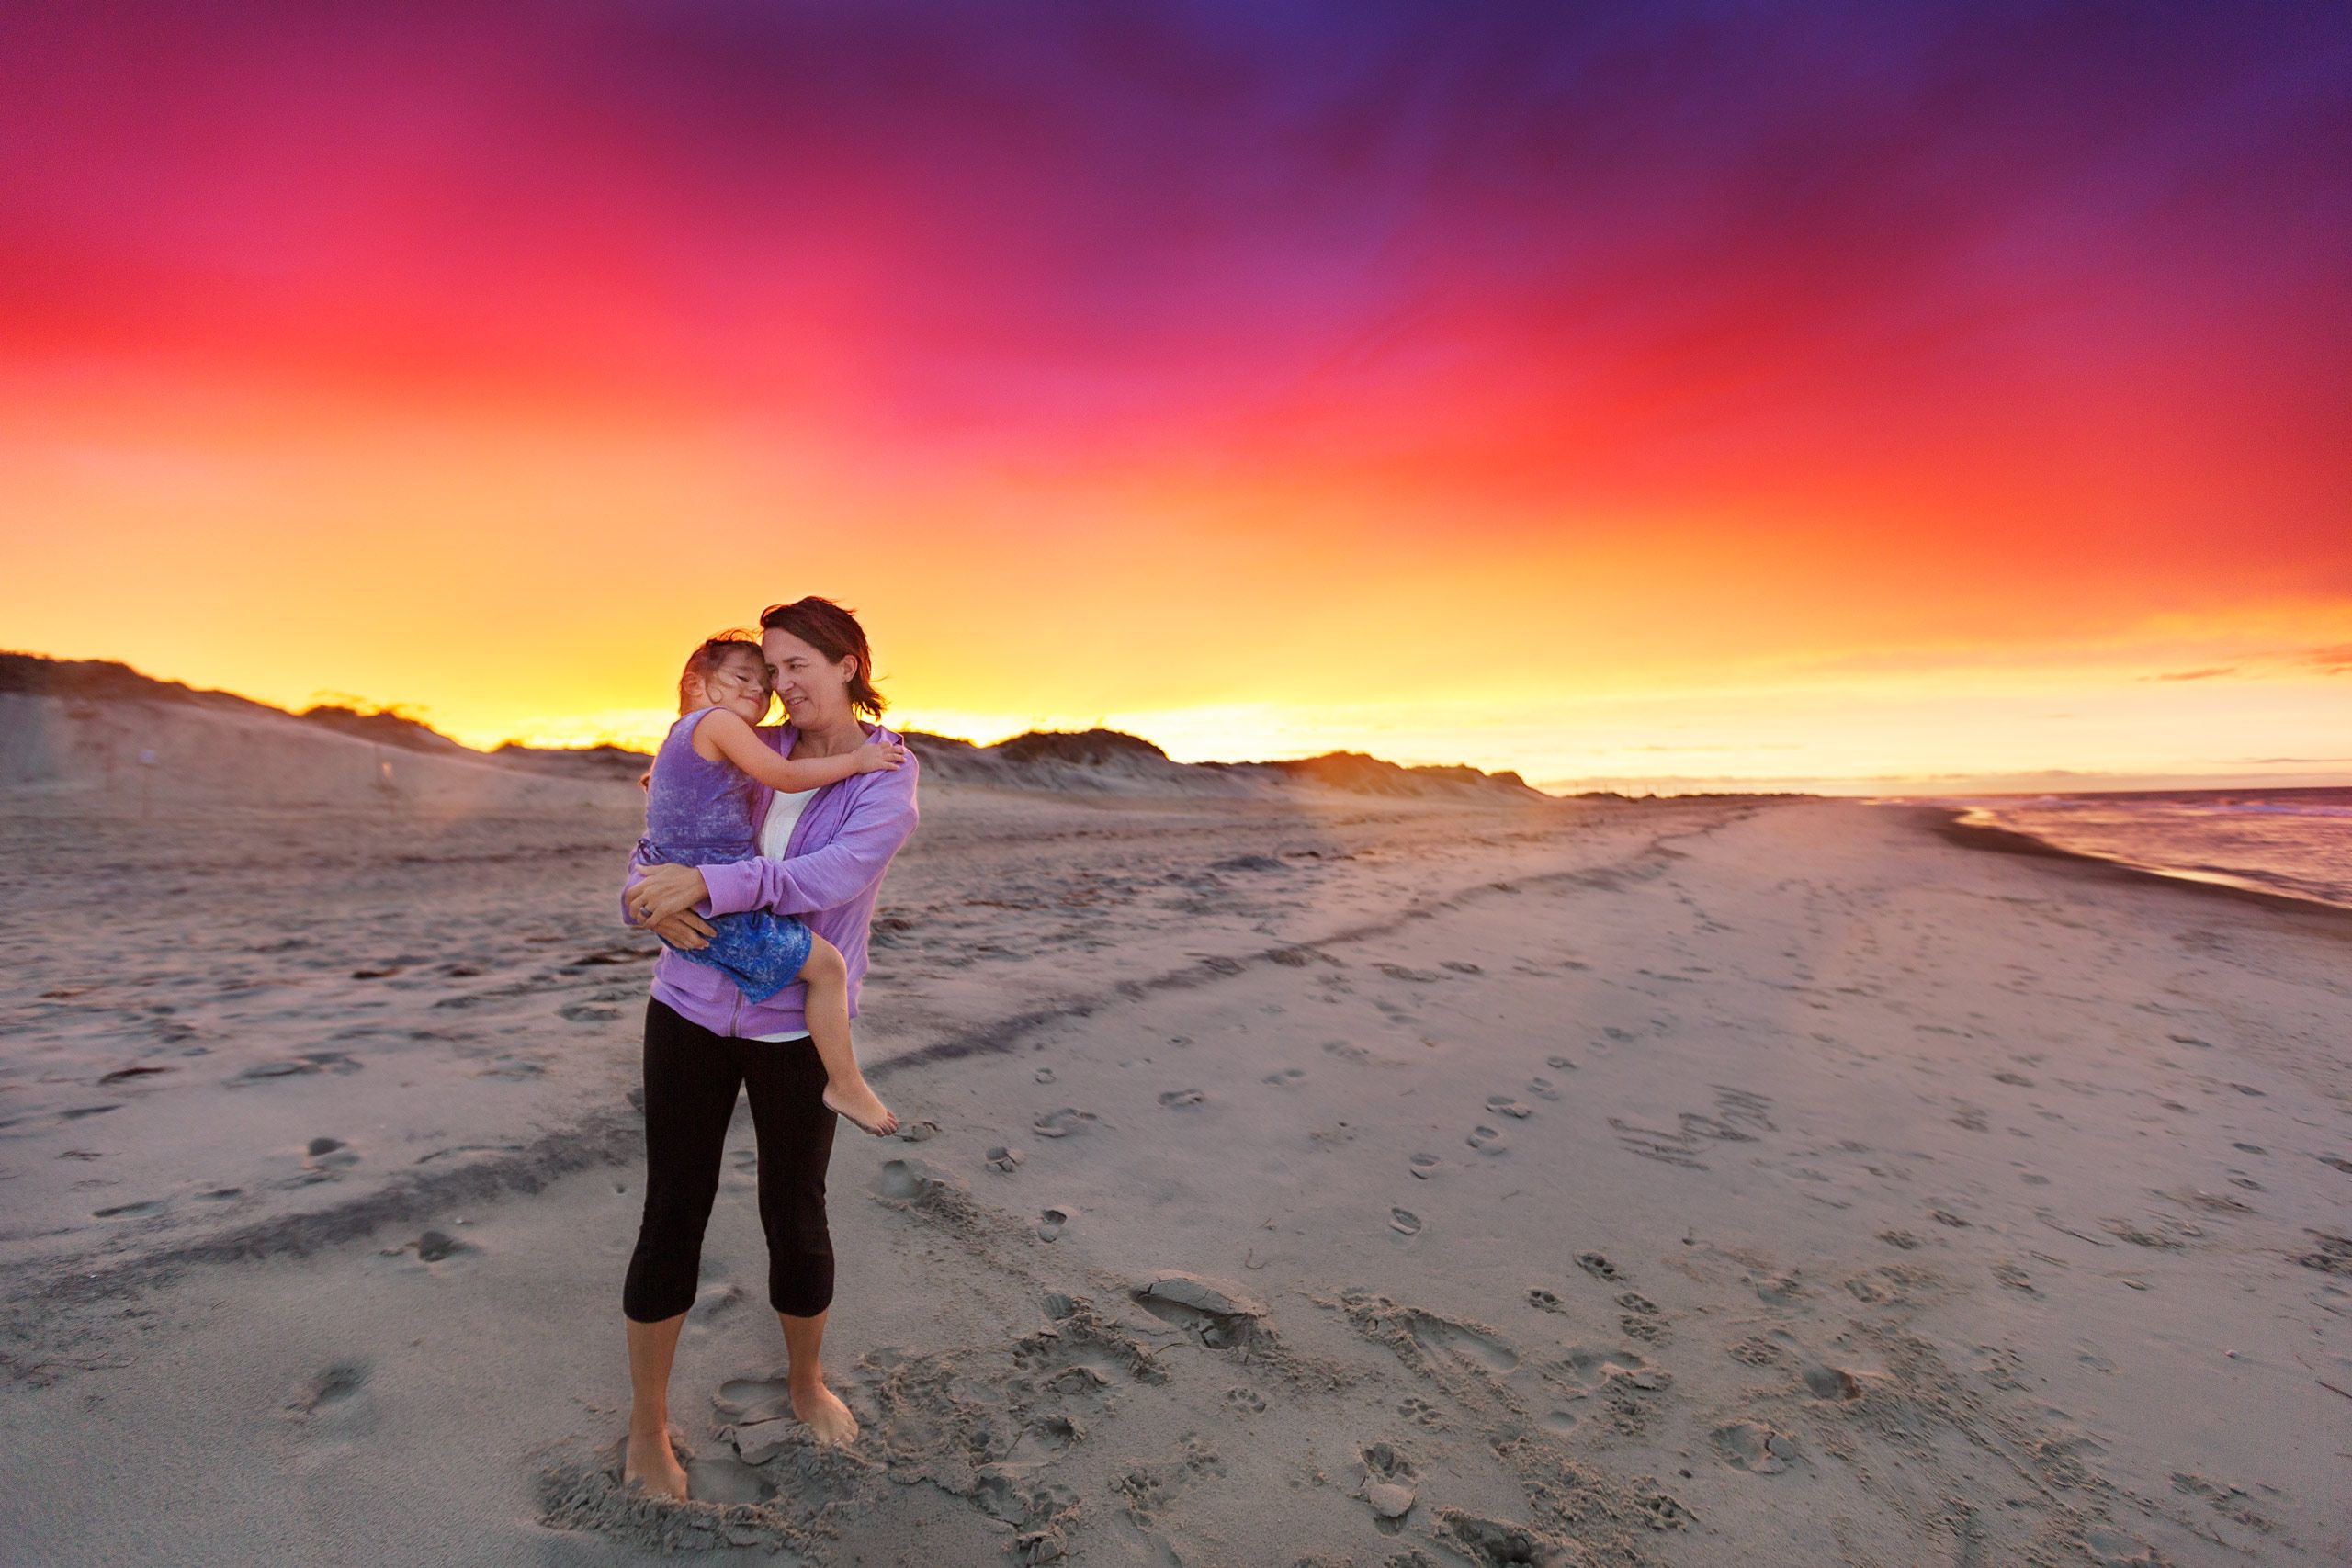 LifeStyle Image - Mom Holding Daughter on Beach at Sunset.jpg